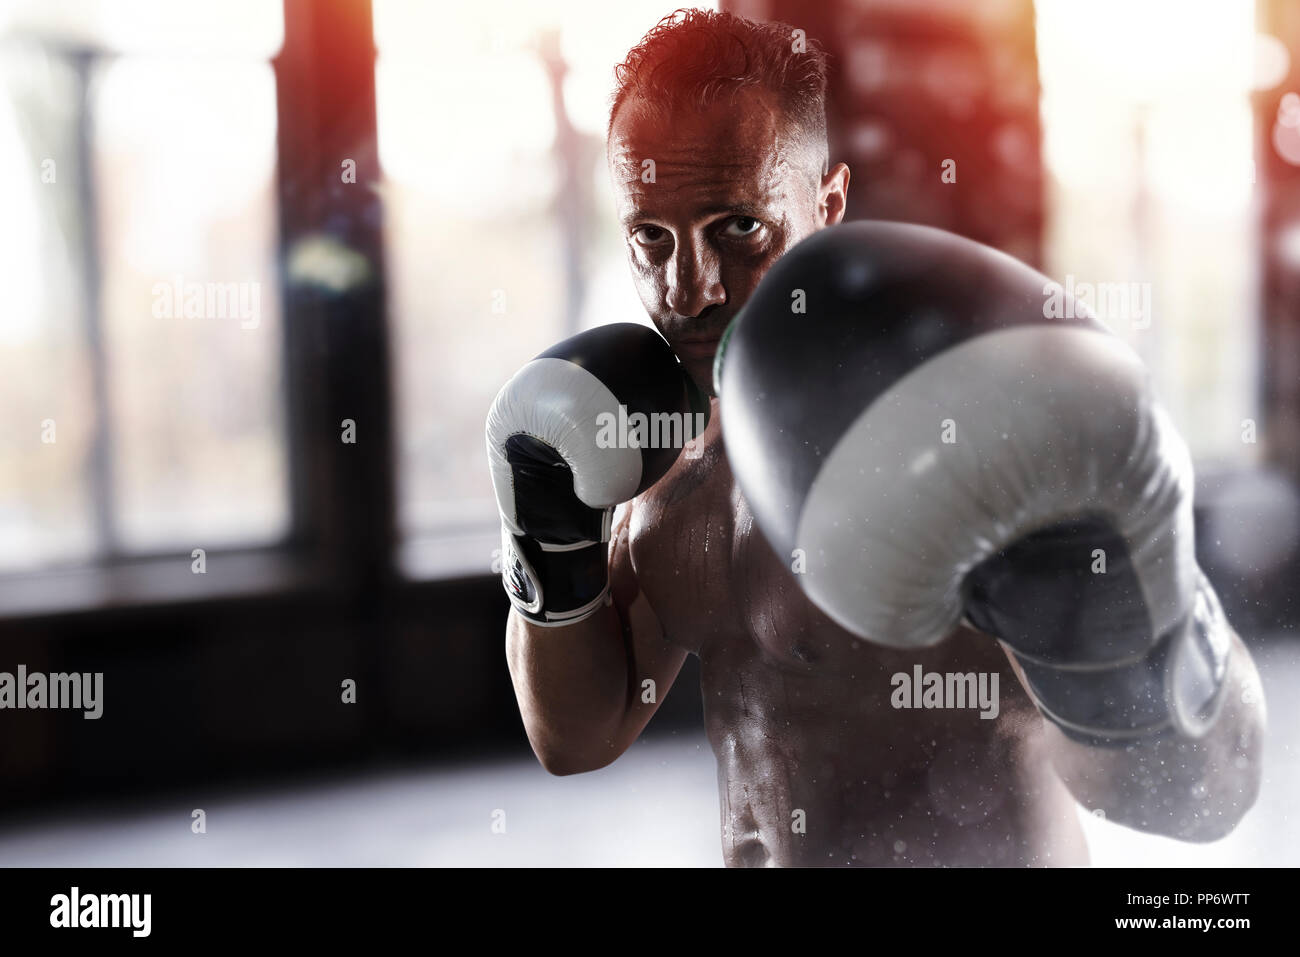 Man does boxing workouts at the gym Stock Photo